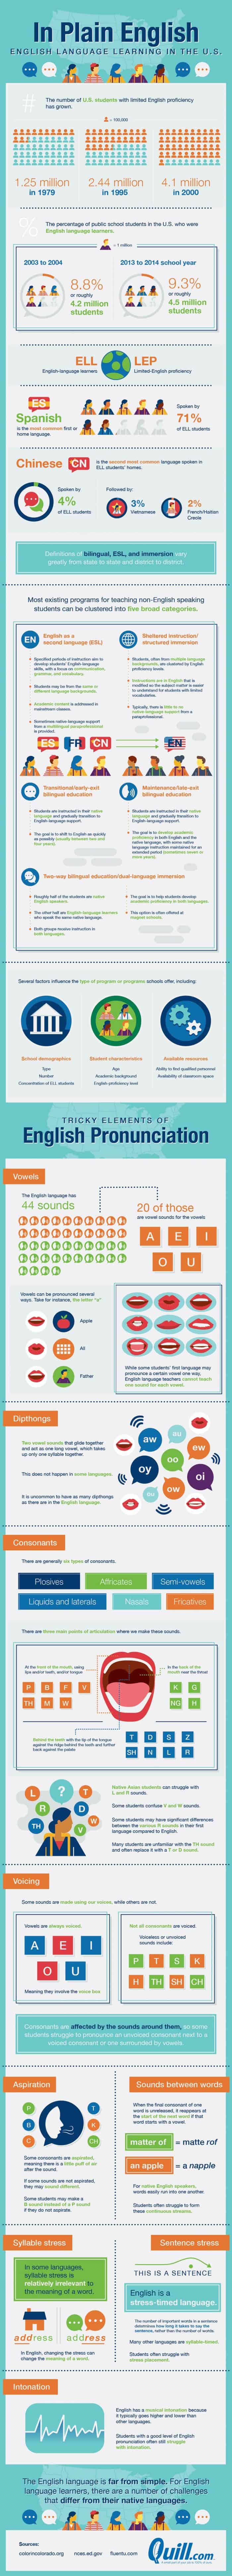 English Language Learning In The US Infographic